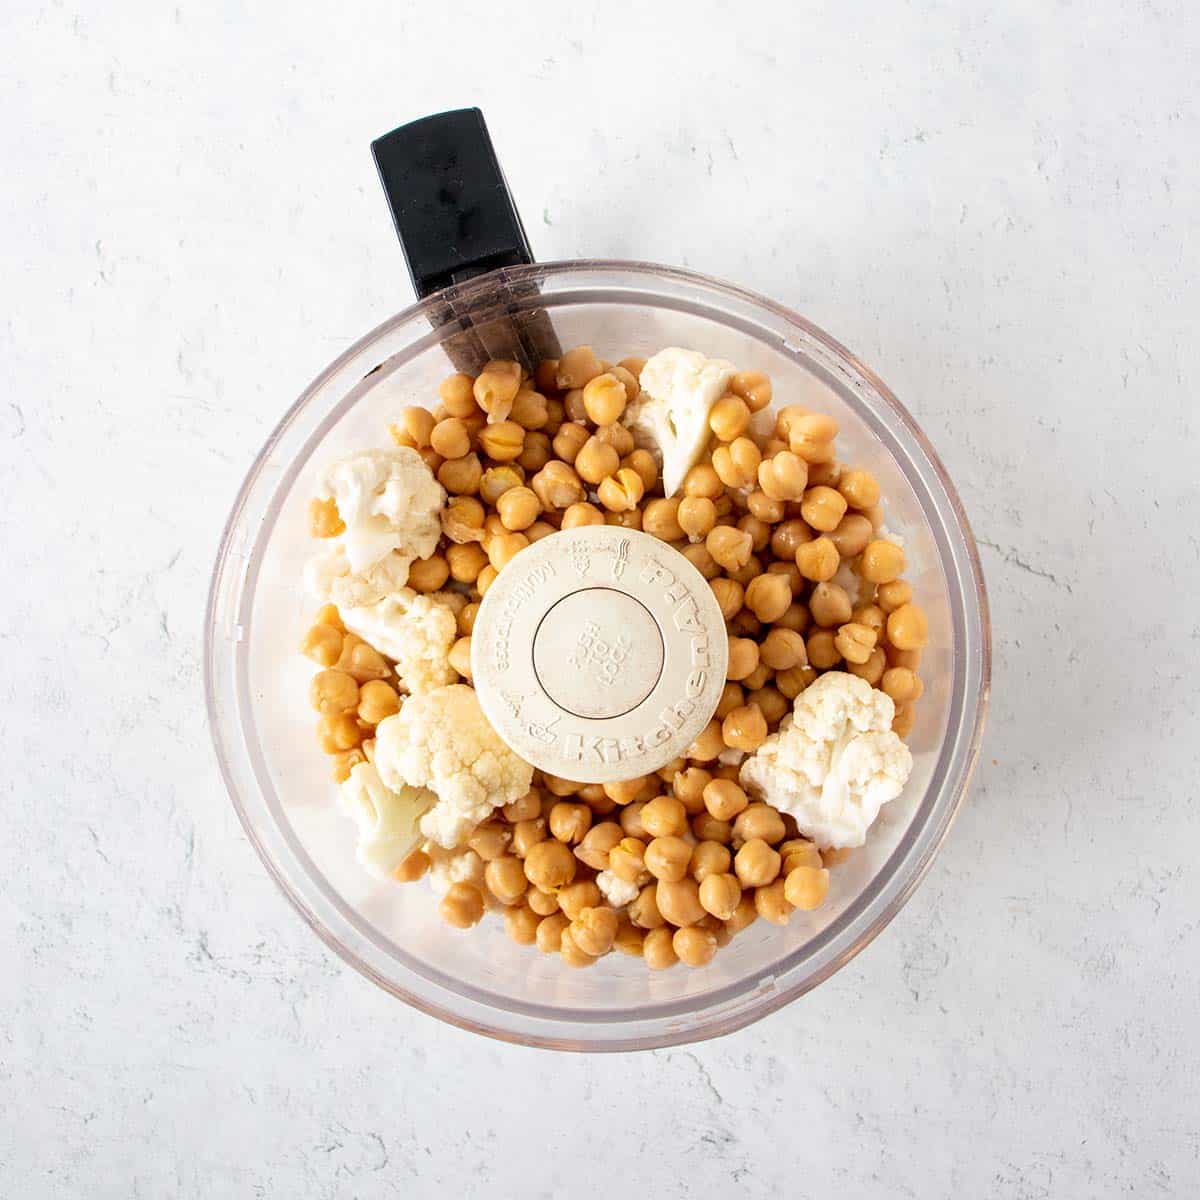 Chickpeas and cauliflower florets added to the food processor.